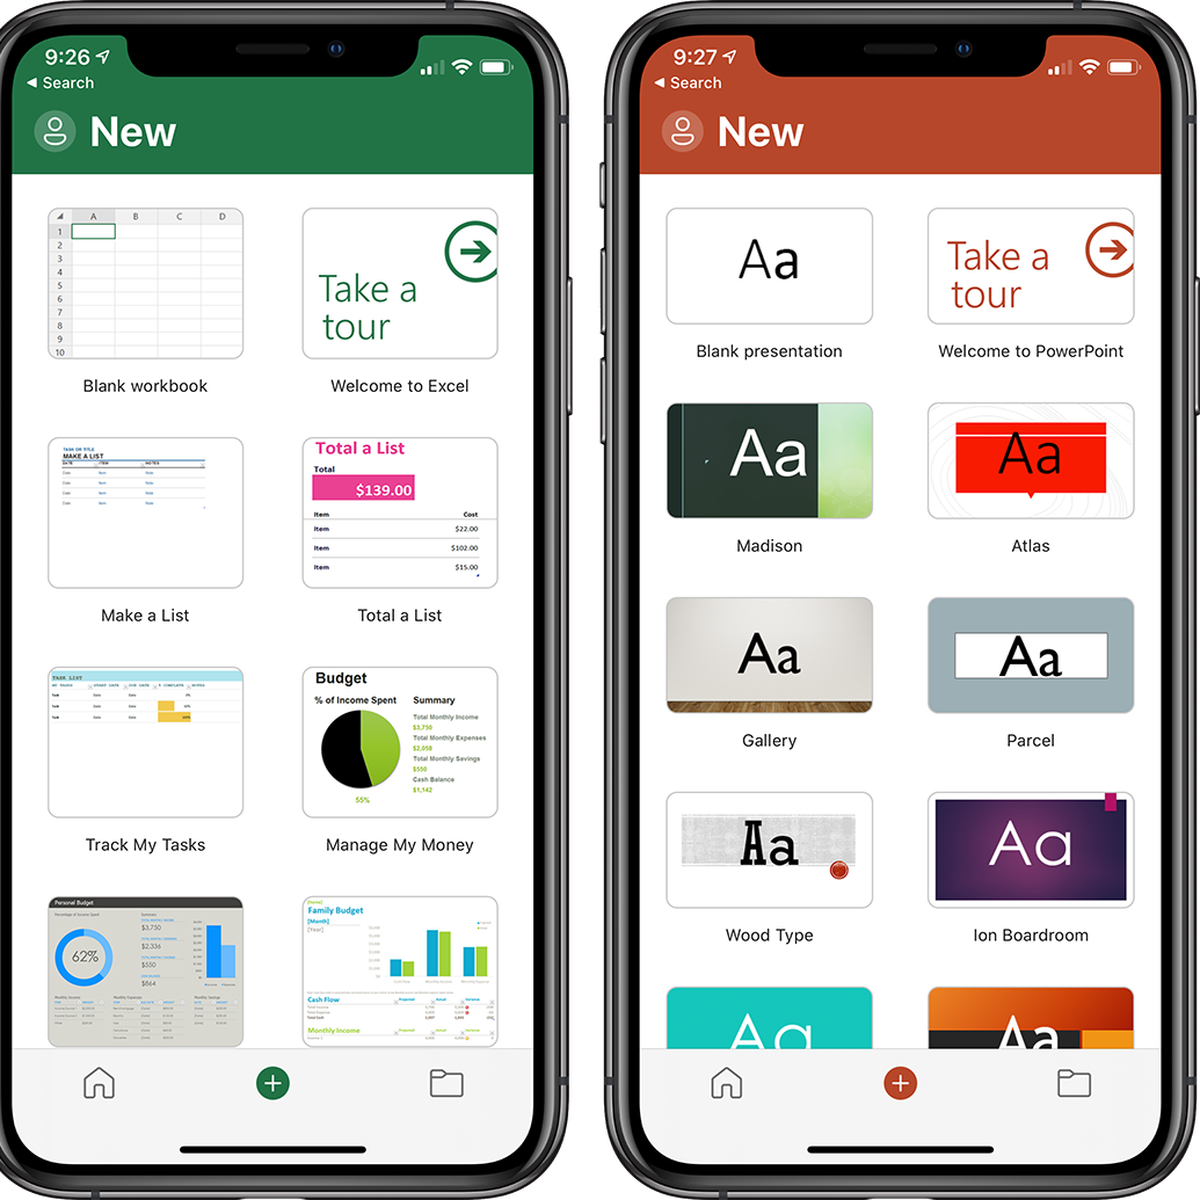 5 Free Best Android Apps for Word Excel and Powerpoint